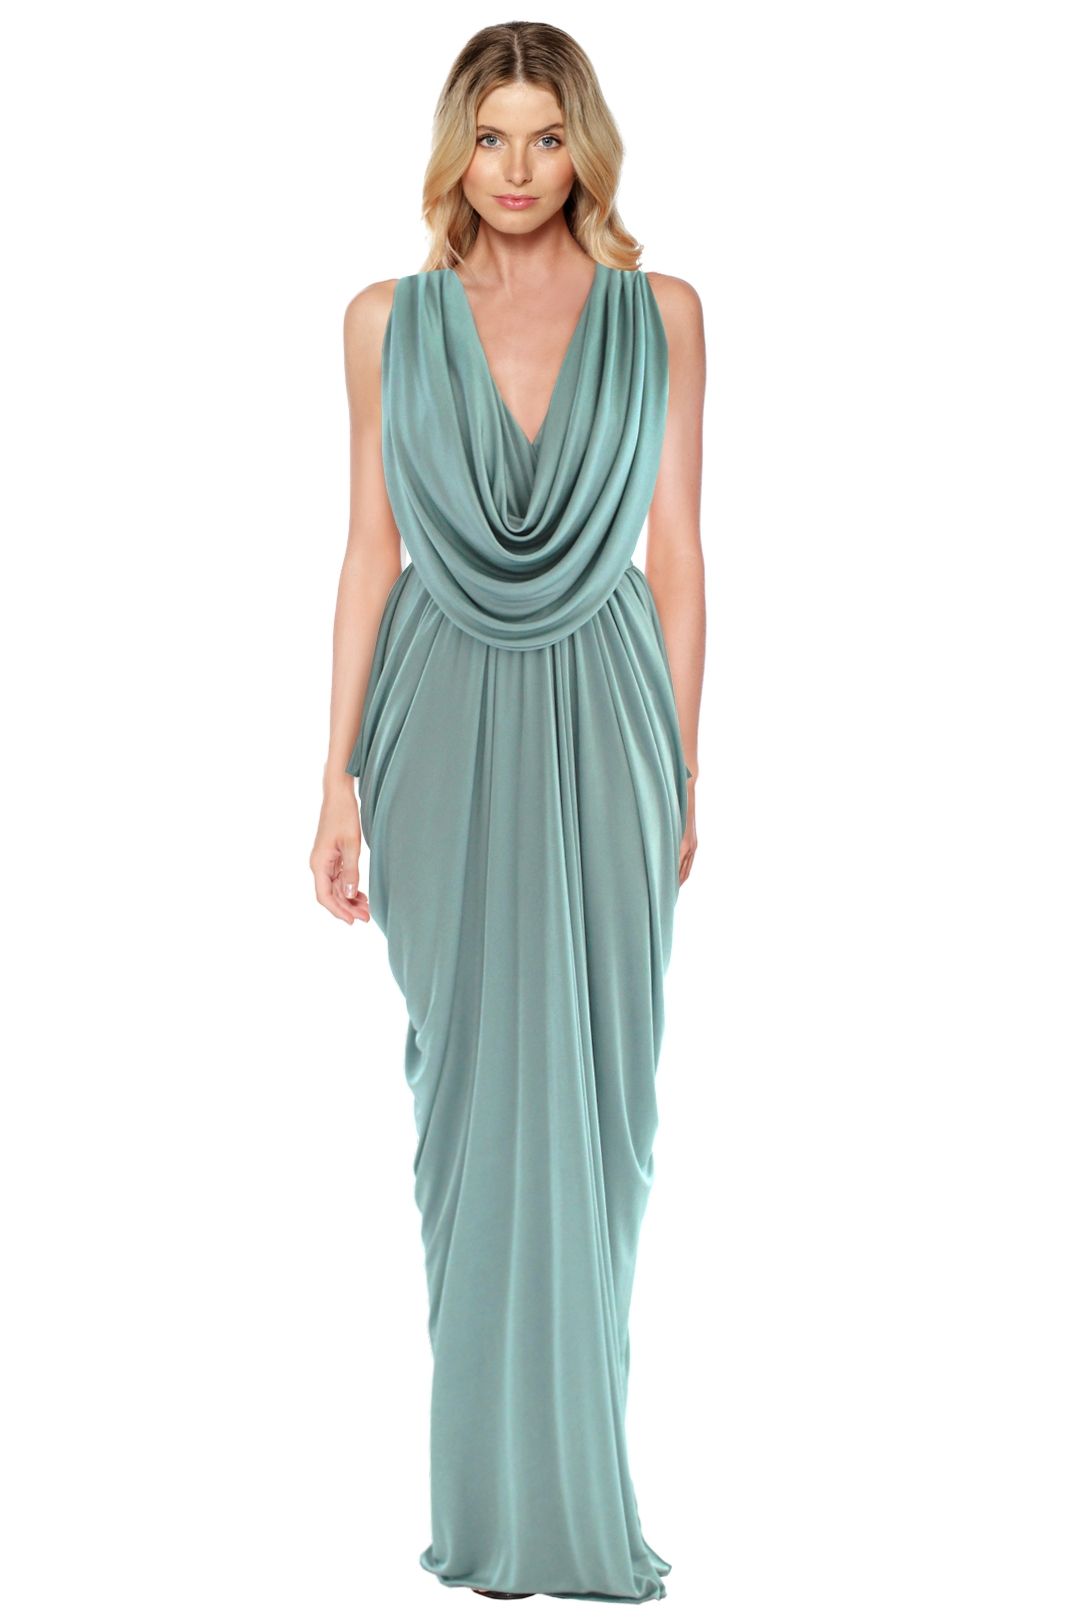 Grecian Maxi Dress by Sheike for Hire ...